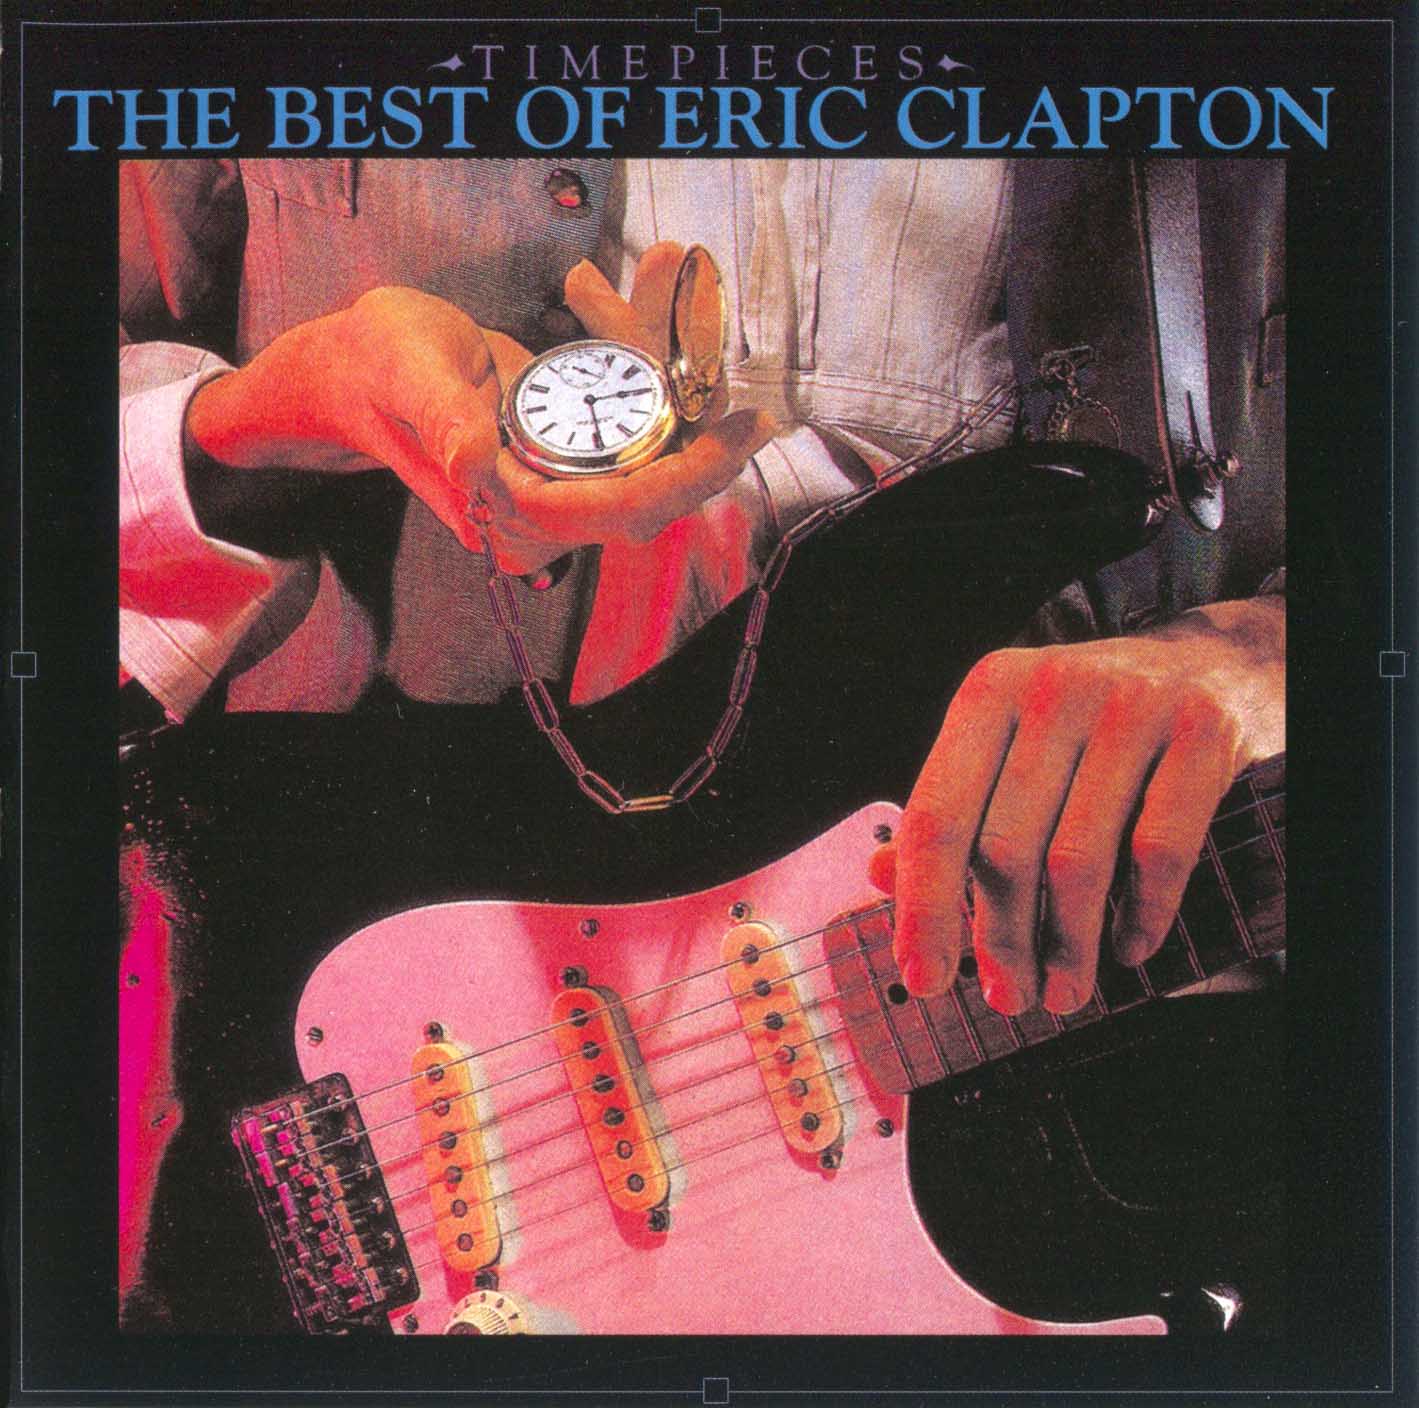 Eric Clapton – Time Pieces: The Best Of Eric Clapton (1982) [Audio Fidelity ‘2014] SACD ISO + Hi-Res FLAC